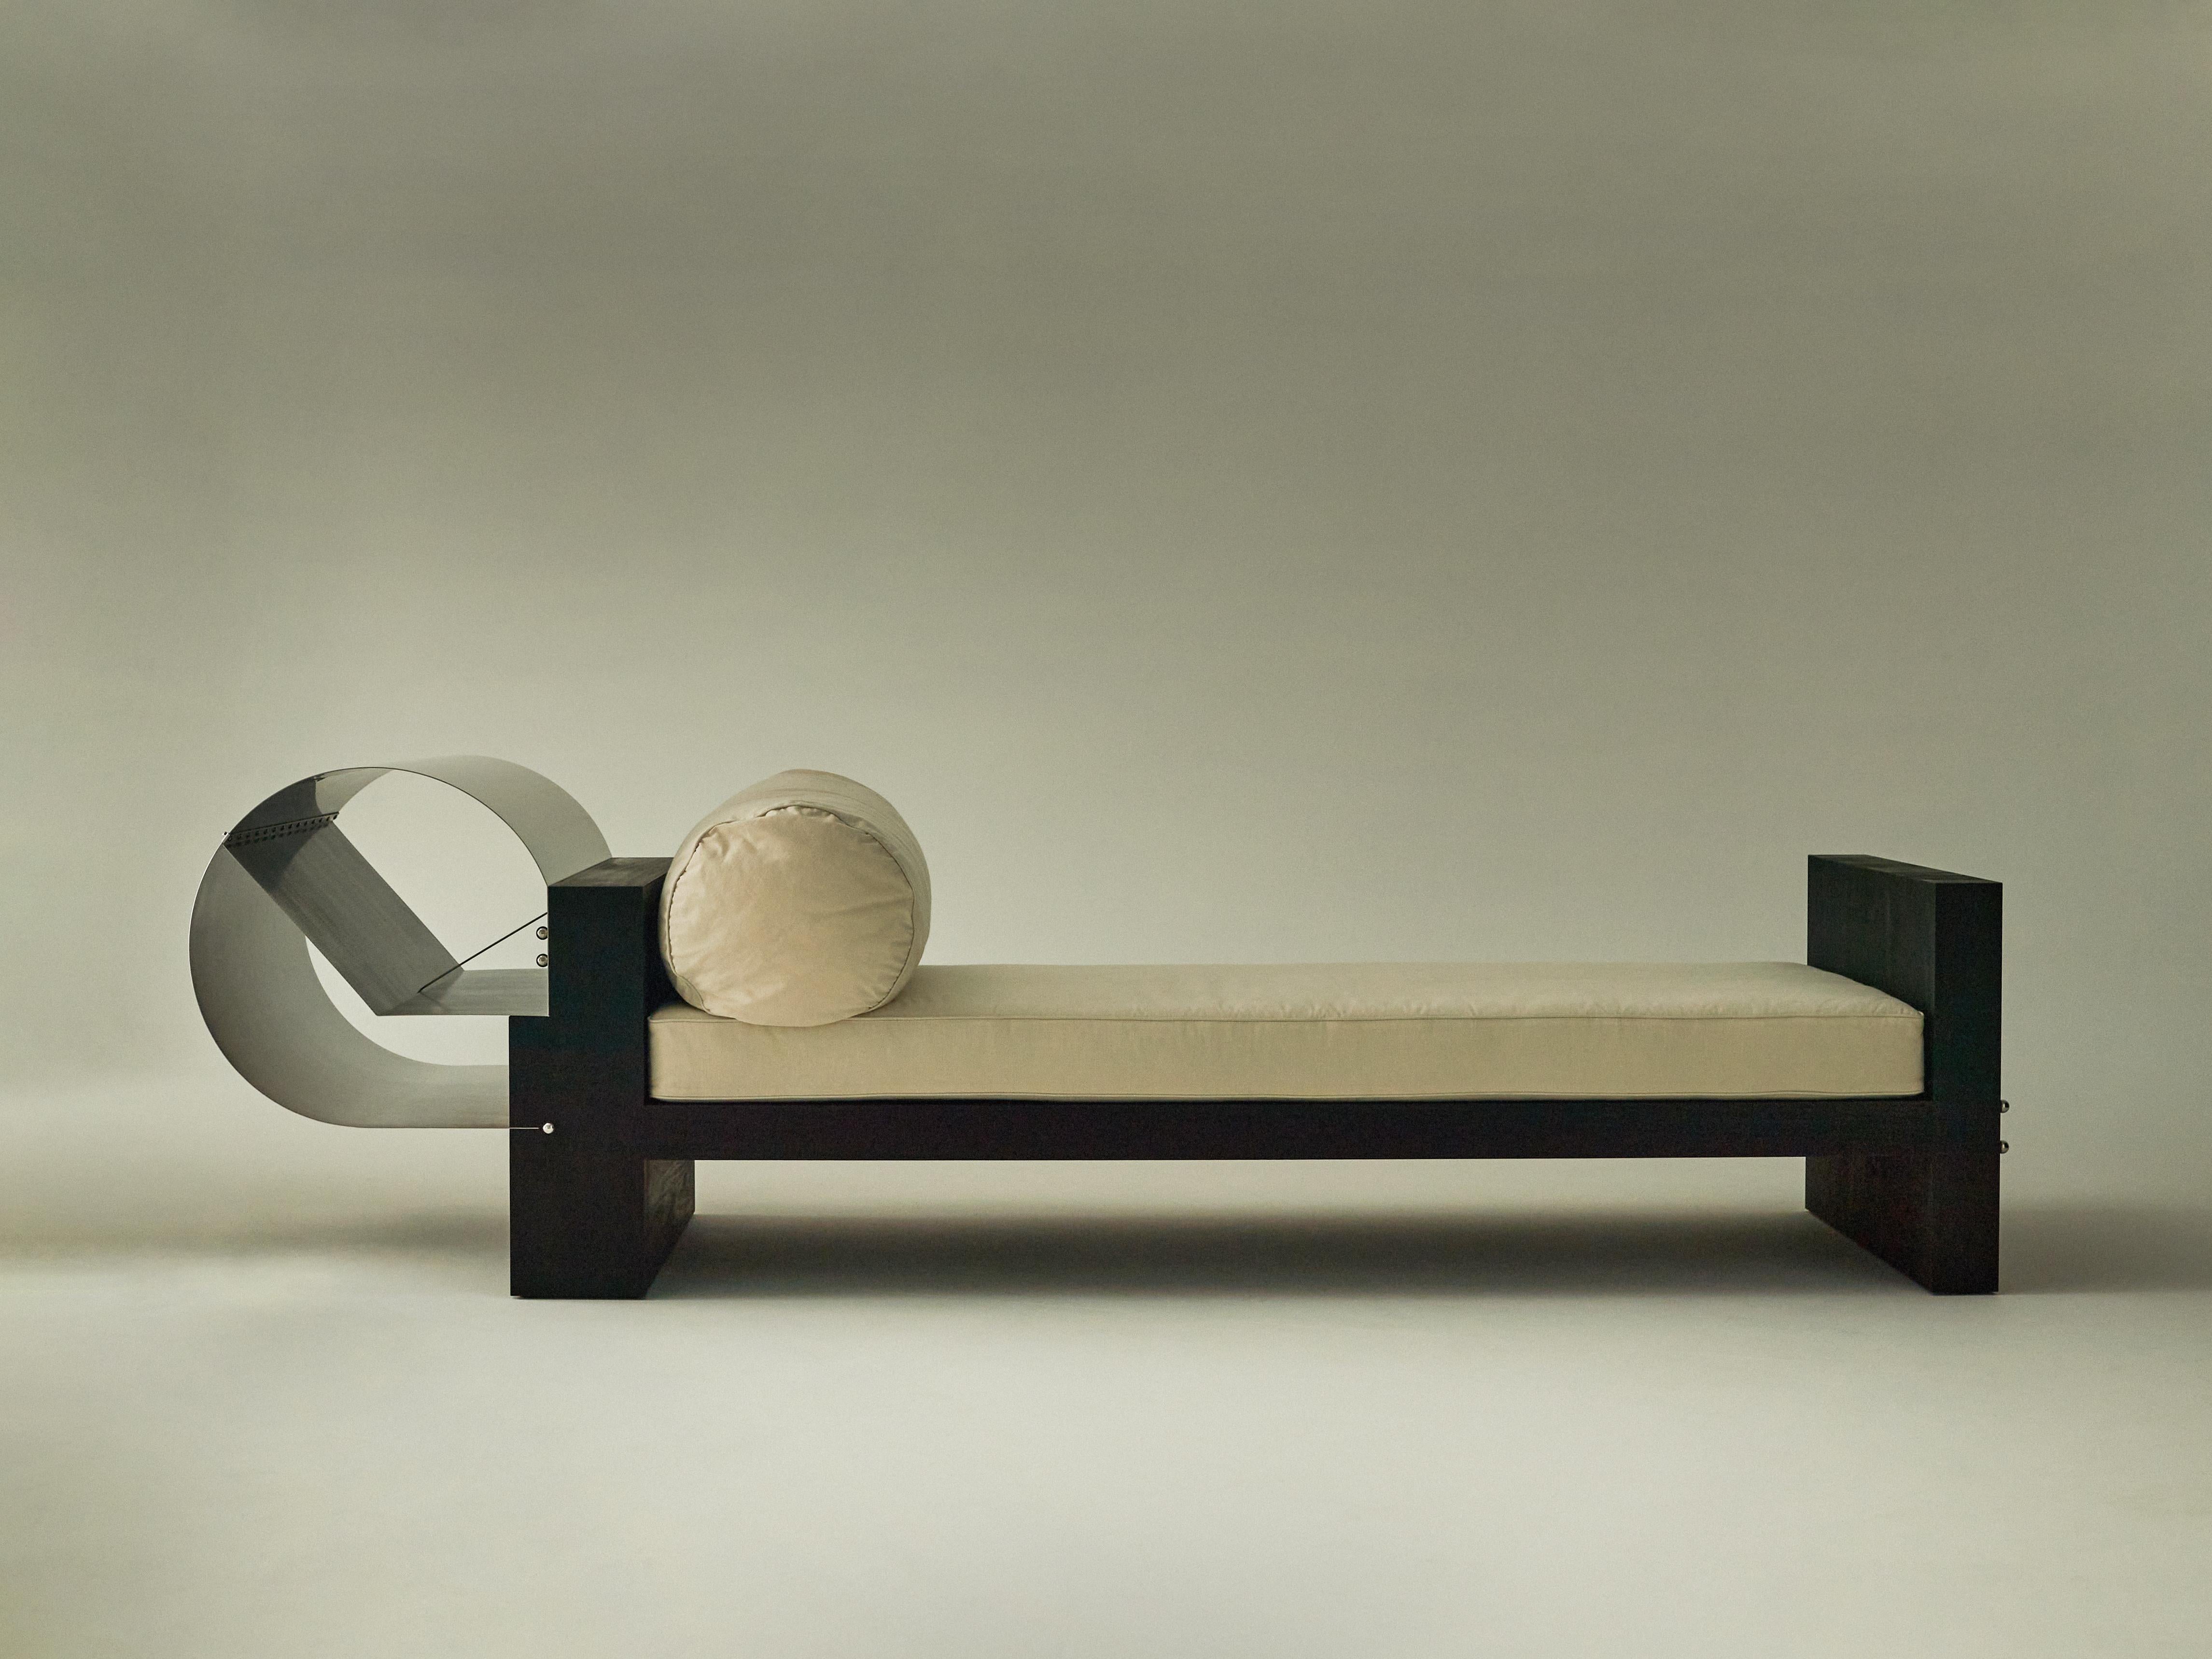 No.0422 daybed by Olivia Bossy
Limited Edition of 3
Dimensions: D 267 x W 90 x H 78 cm
Materials: Ebonised Tasmanian Blackwood, stainless steel, cotton

A collection born of fire, Euclidean geometry and the display mechanism of museum